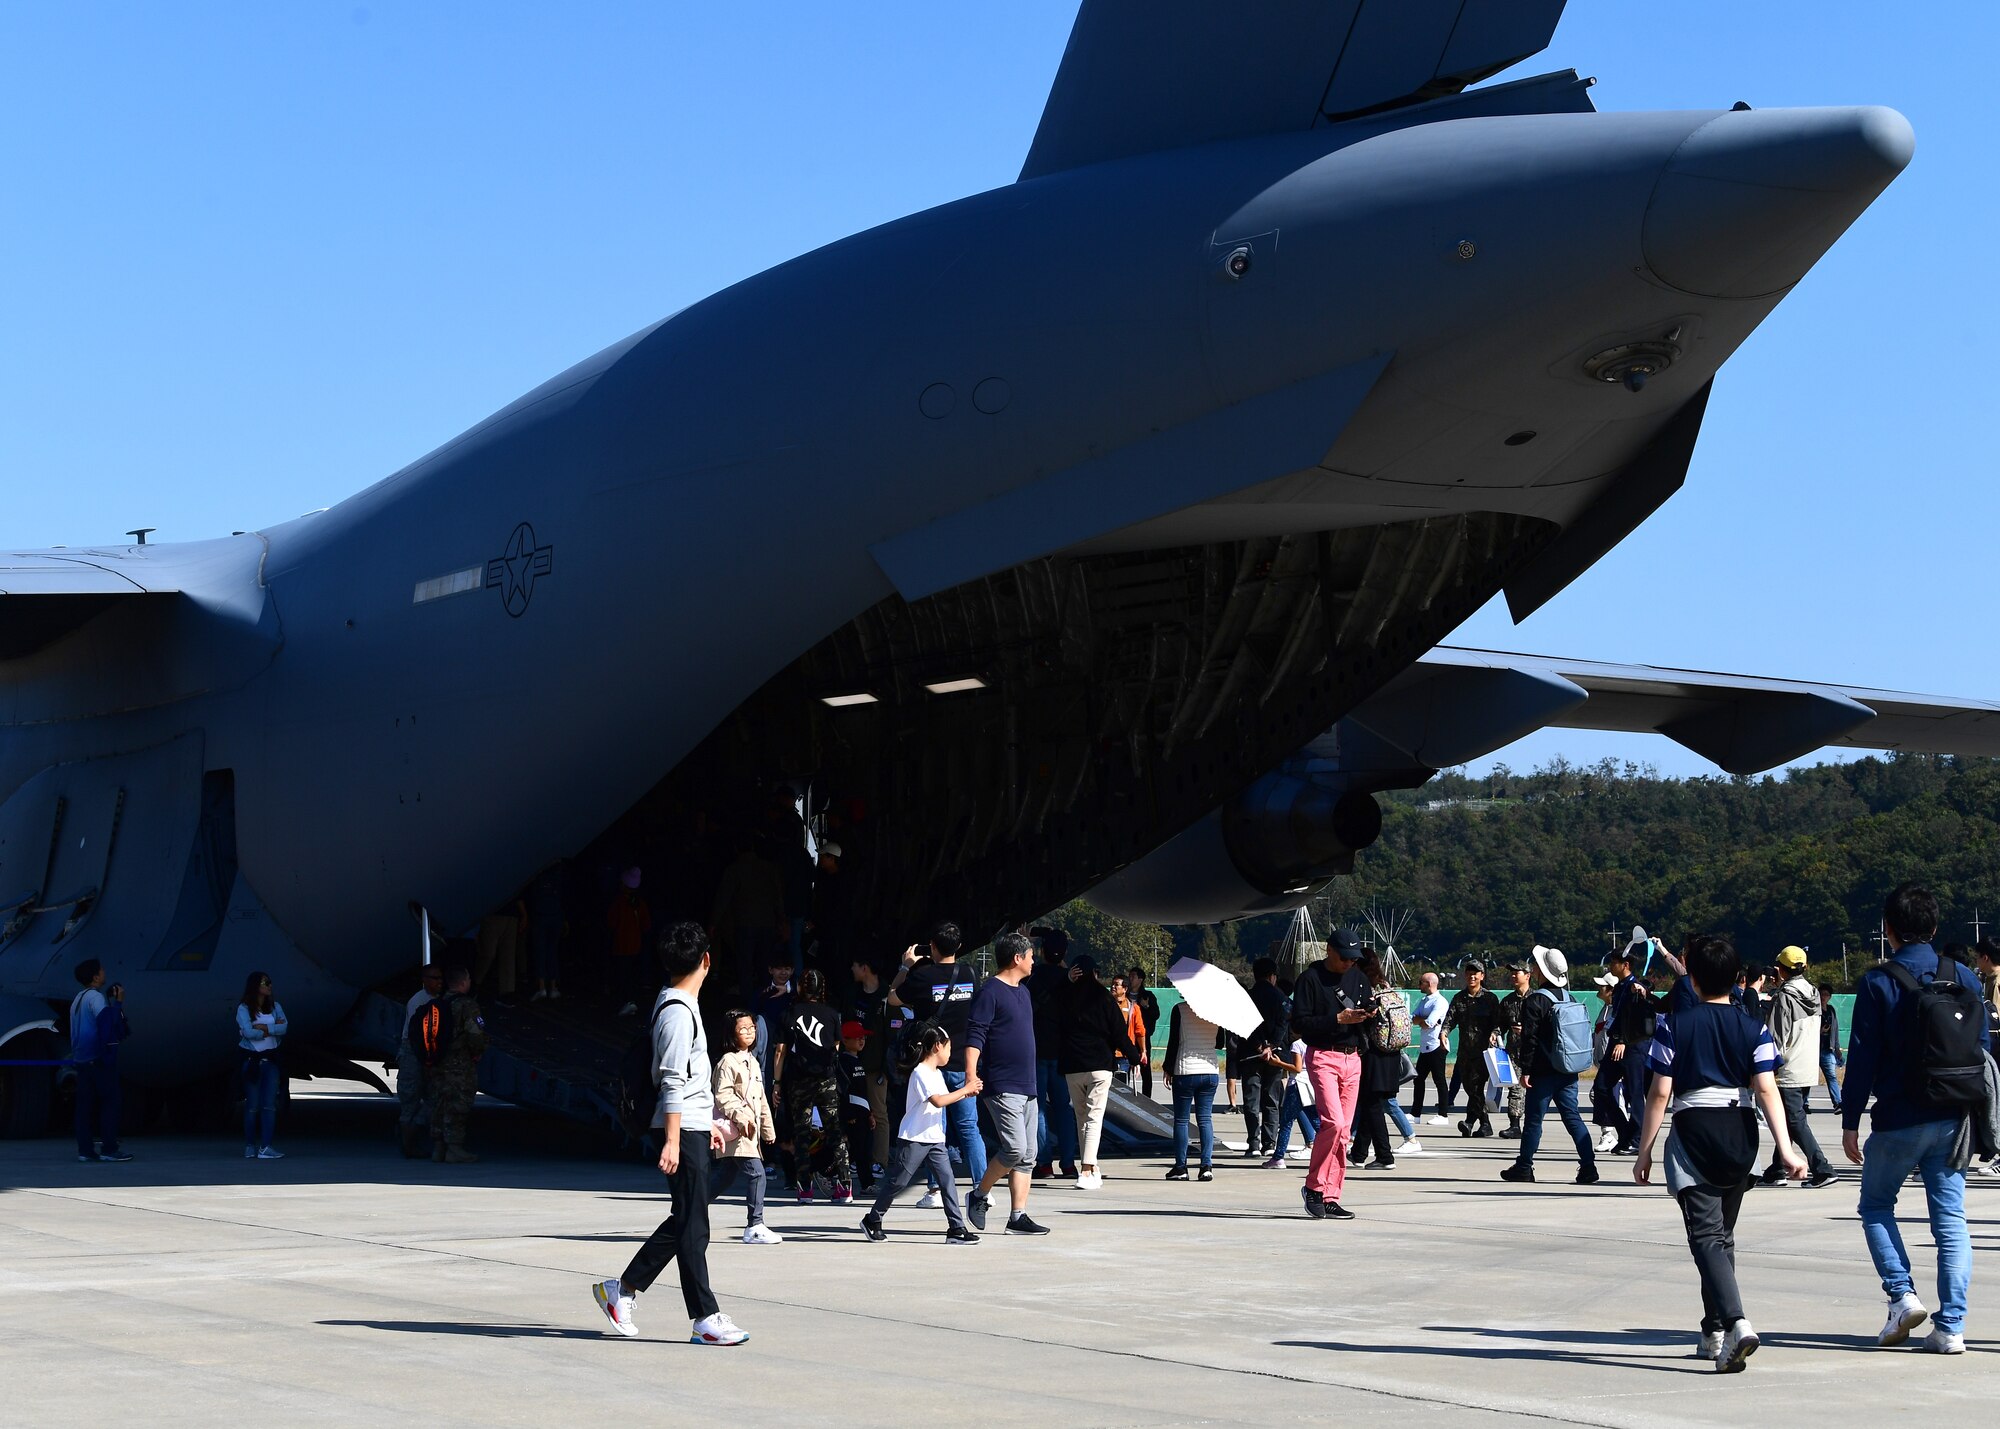 Attendees of the Seoul International Aerospace and Defense Exhibition 2019 walk around a C-17 Globemaster III assigned to the Pacific Air Forces C-17 Demonstration Team at Joint Base Pearl Harbor-Hickam, Hawaii, performs during the Seoul International Aerospace and Defense Exhibition 2019 at the Seoul Airport, Republic of Korea, October 19, 2019.